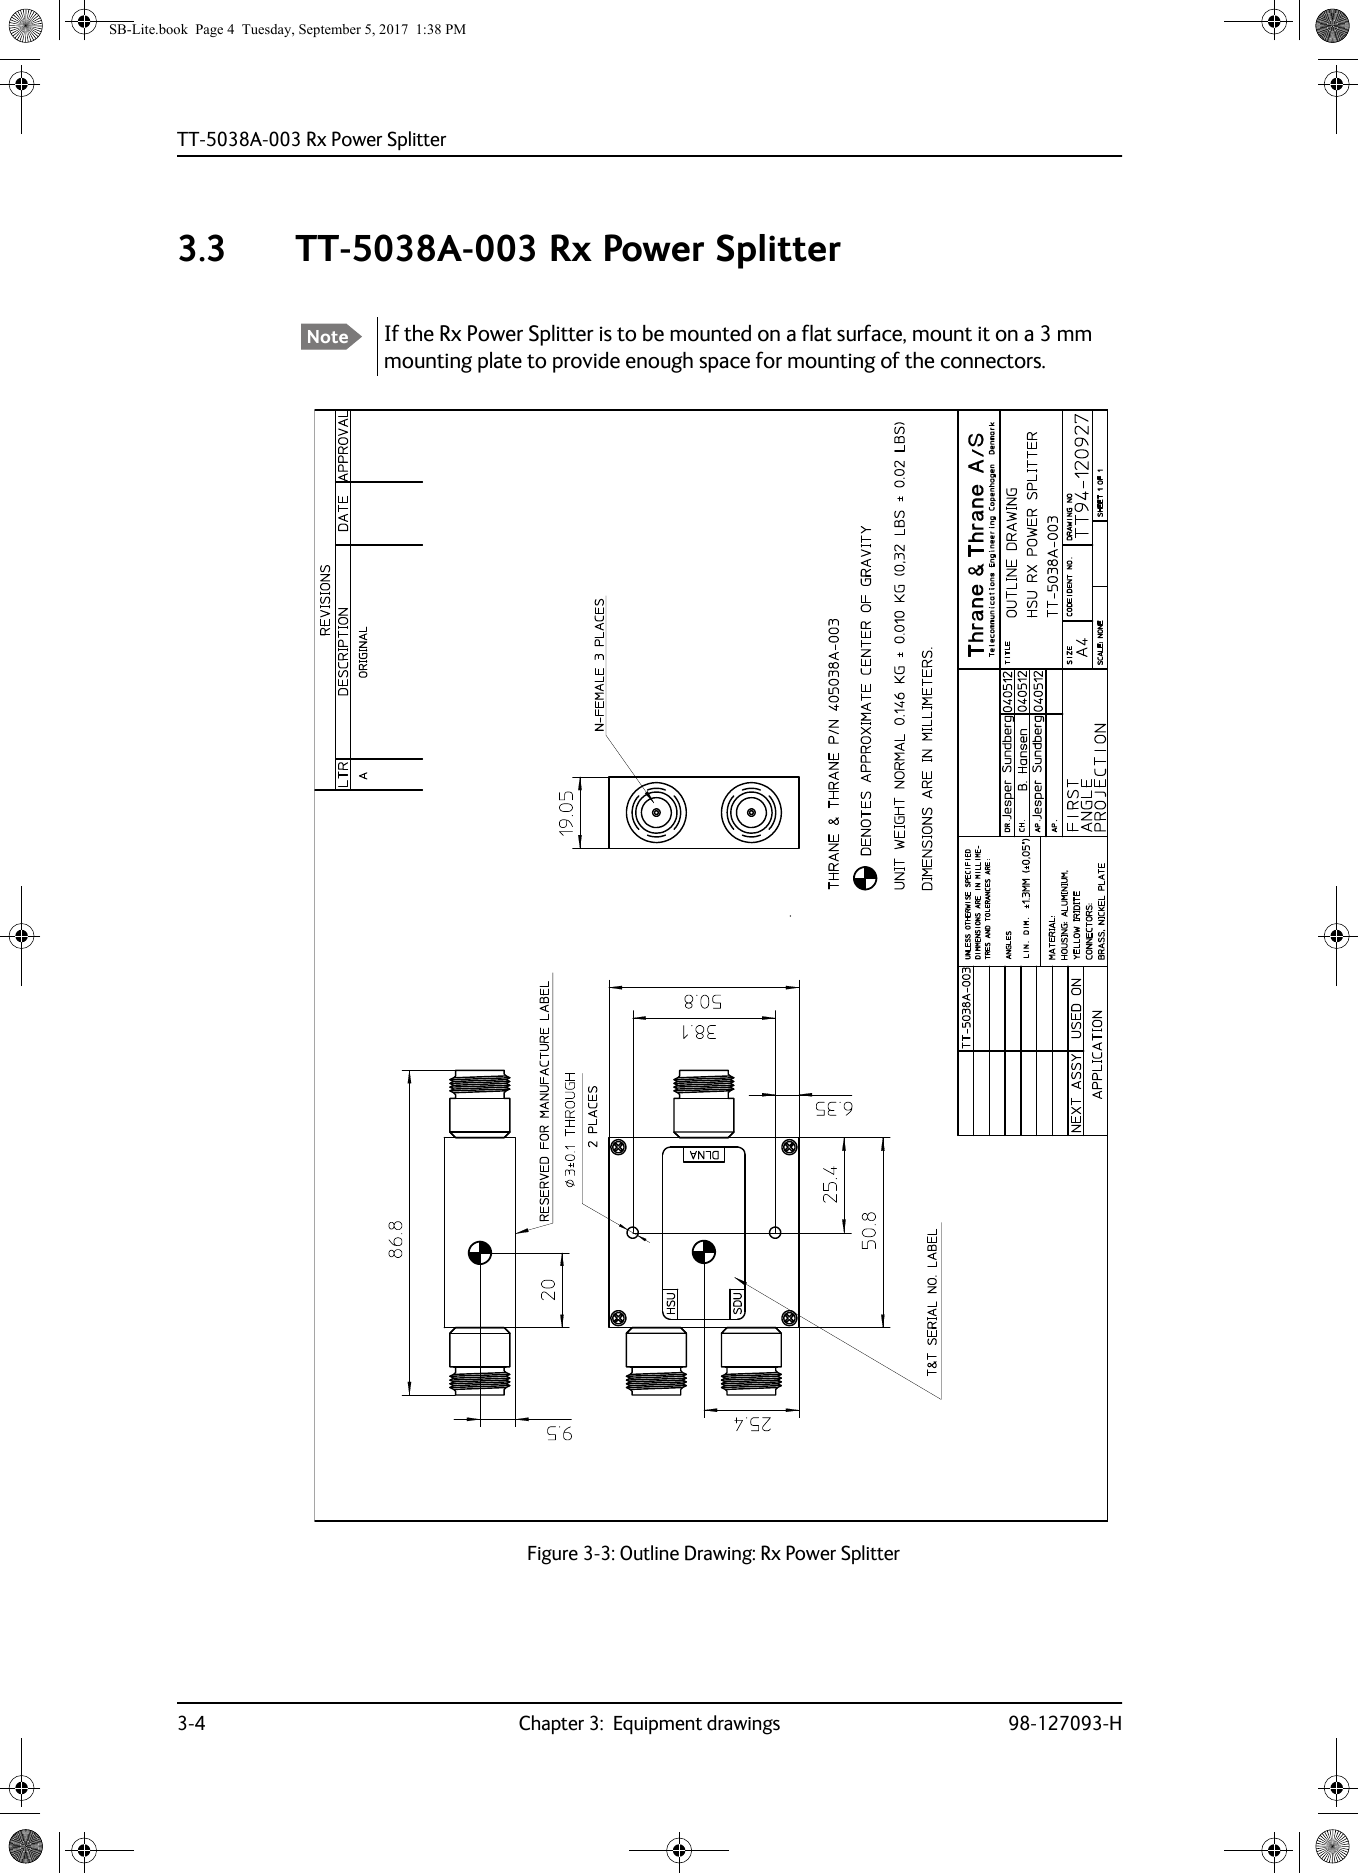 TT-5038A-003 Rx Power Splitter3-4 Chapter 3:  Equipment drawings 98-127093-H3.3 TT-5038A-003 Rx Power SplitterNote If the Rx Power Splitter is to be mounted on a flat surface, mount it on a 3 mm mounting plate to provide enough space for mounting of the connectors.Figure 3-3:  Outline Drawing: Rx Power SplitterSB-Lite.book  Page 4  Tuesday, September 5, 2017  1:38 PM